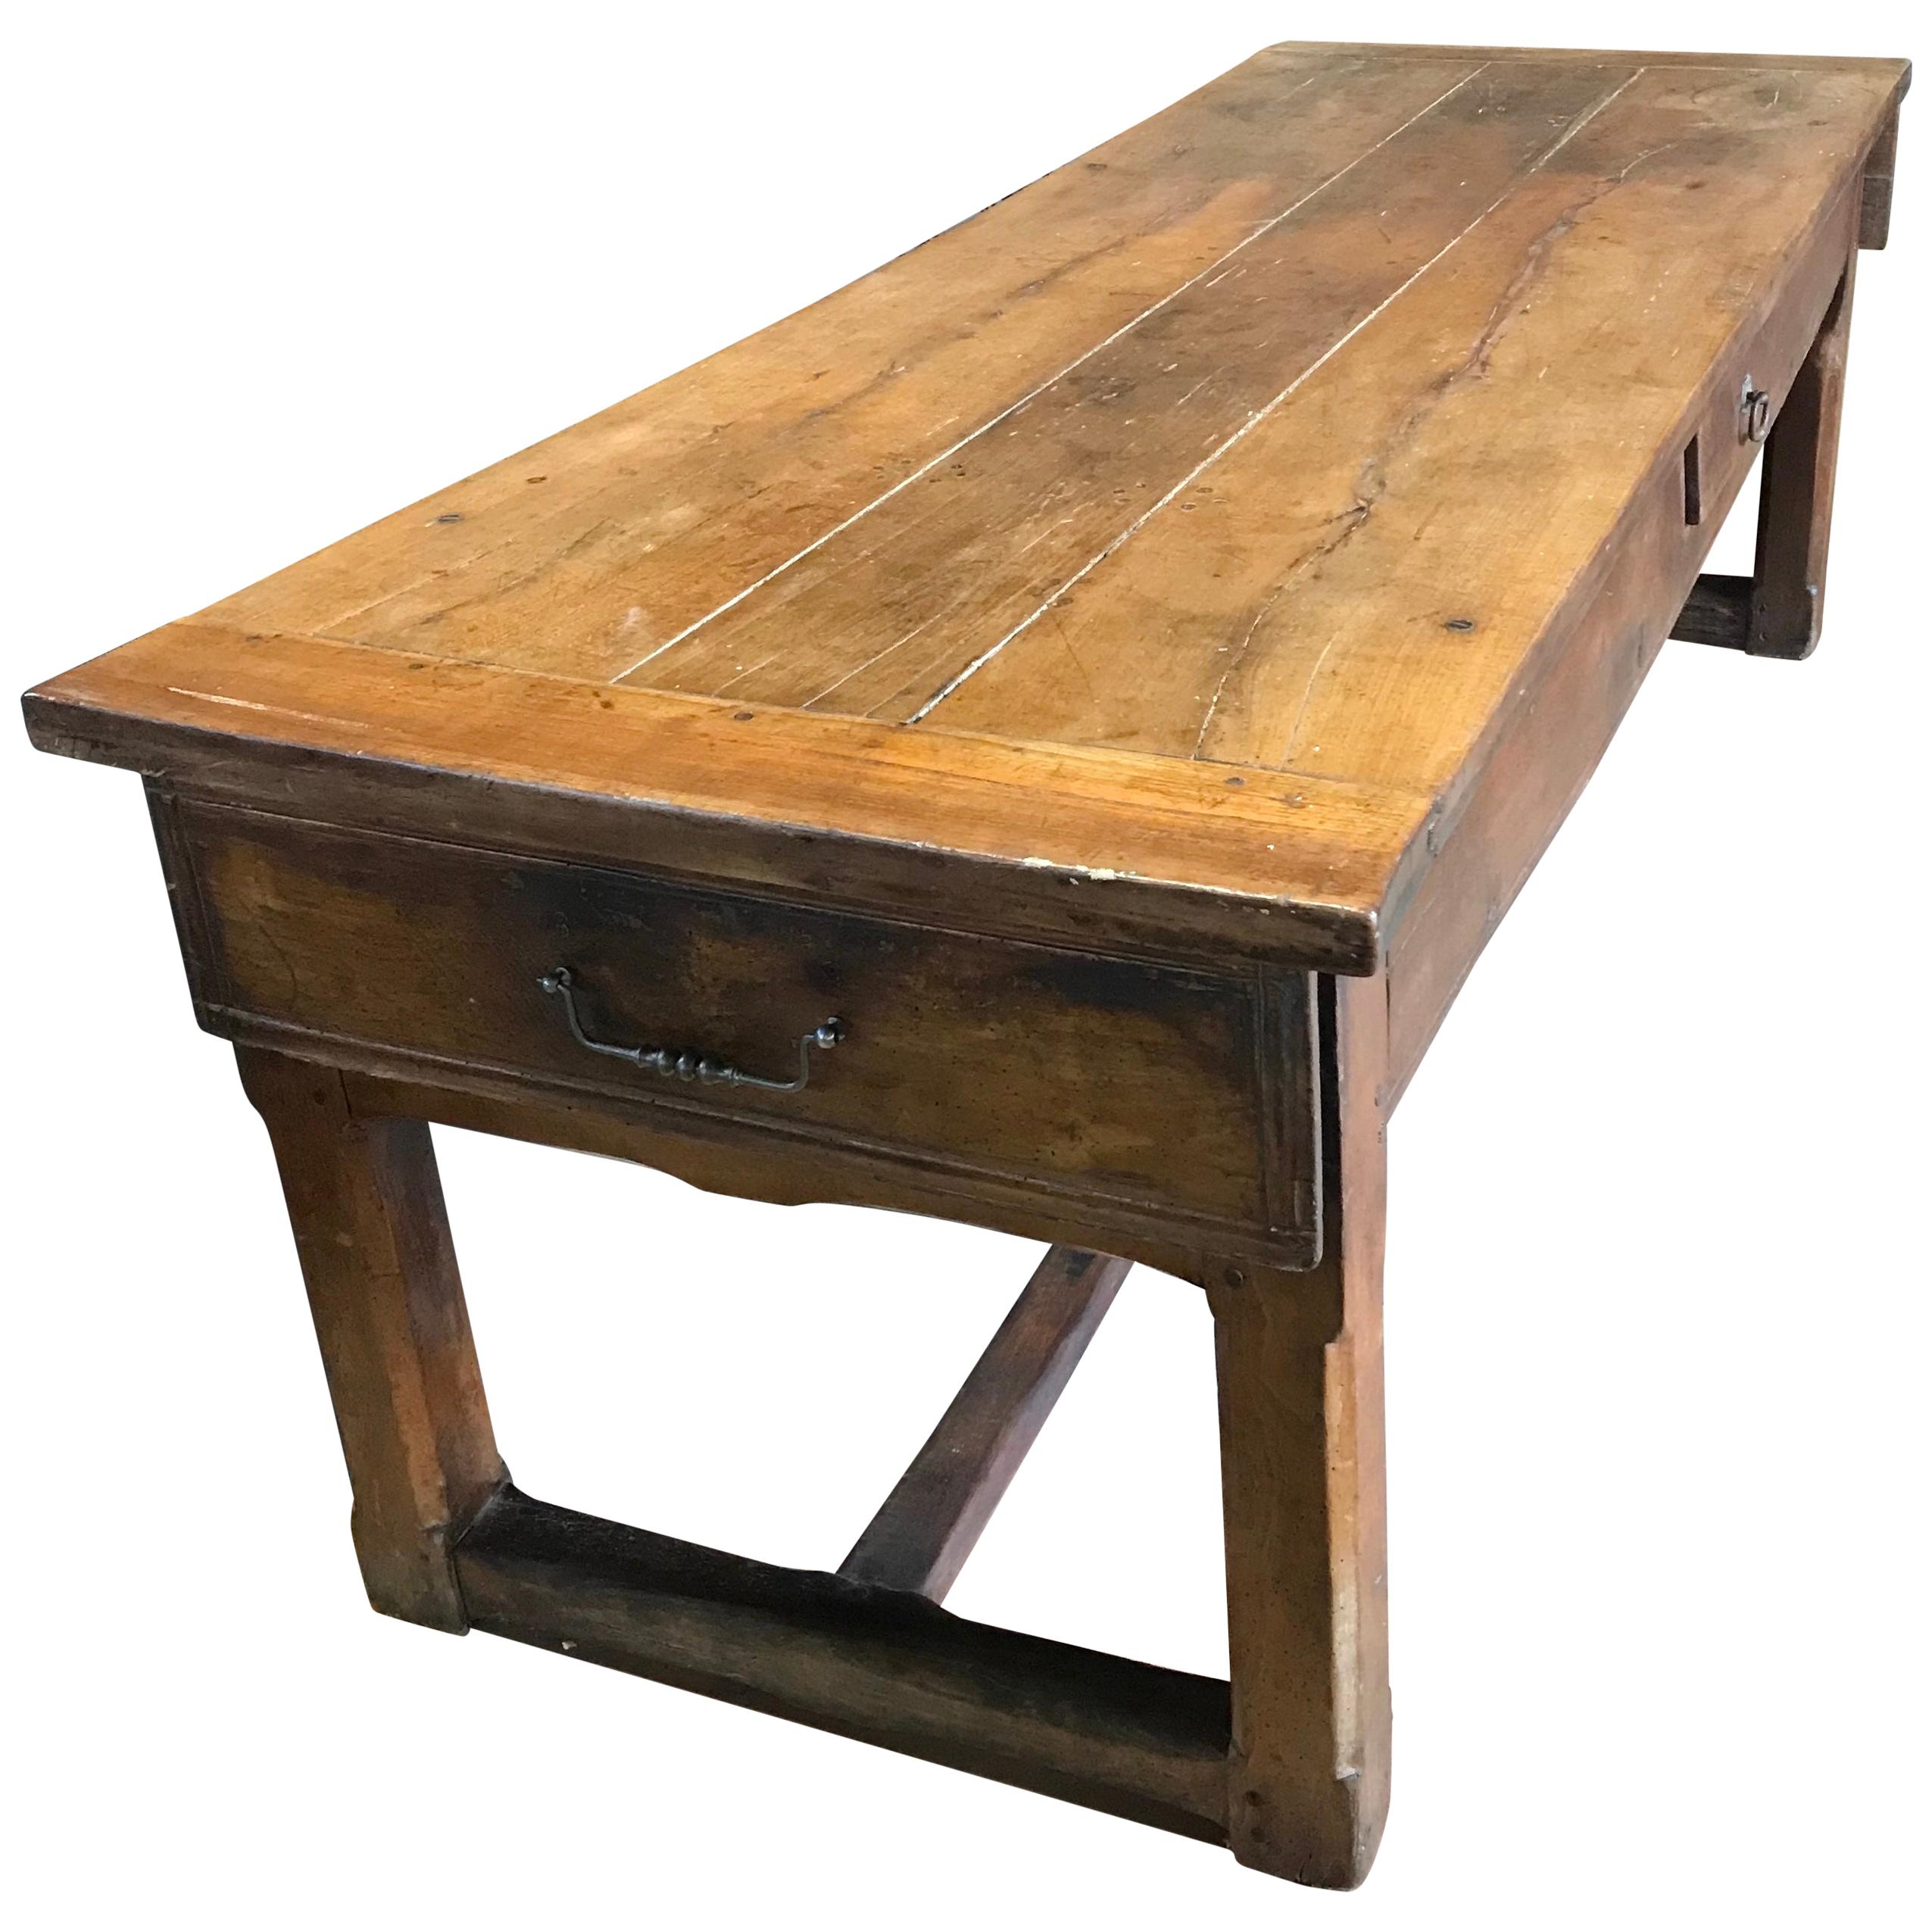 Super Early Walnut French Country Farmhouse Table